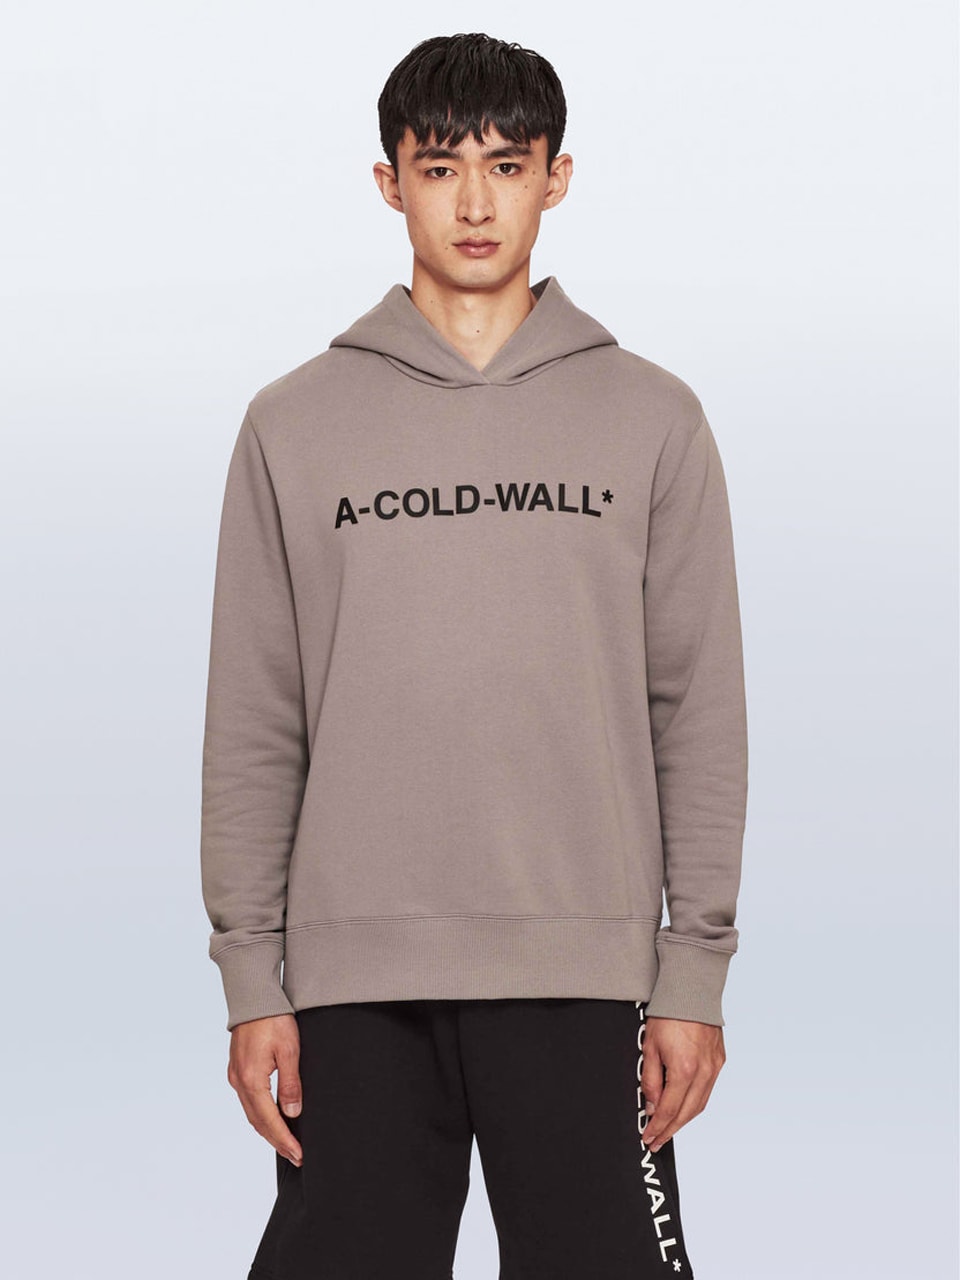 A-COLD-WALL* Drops Its SS22 Campaign Imagery and In-Store Collection